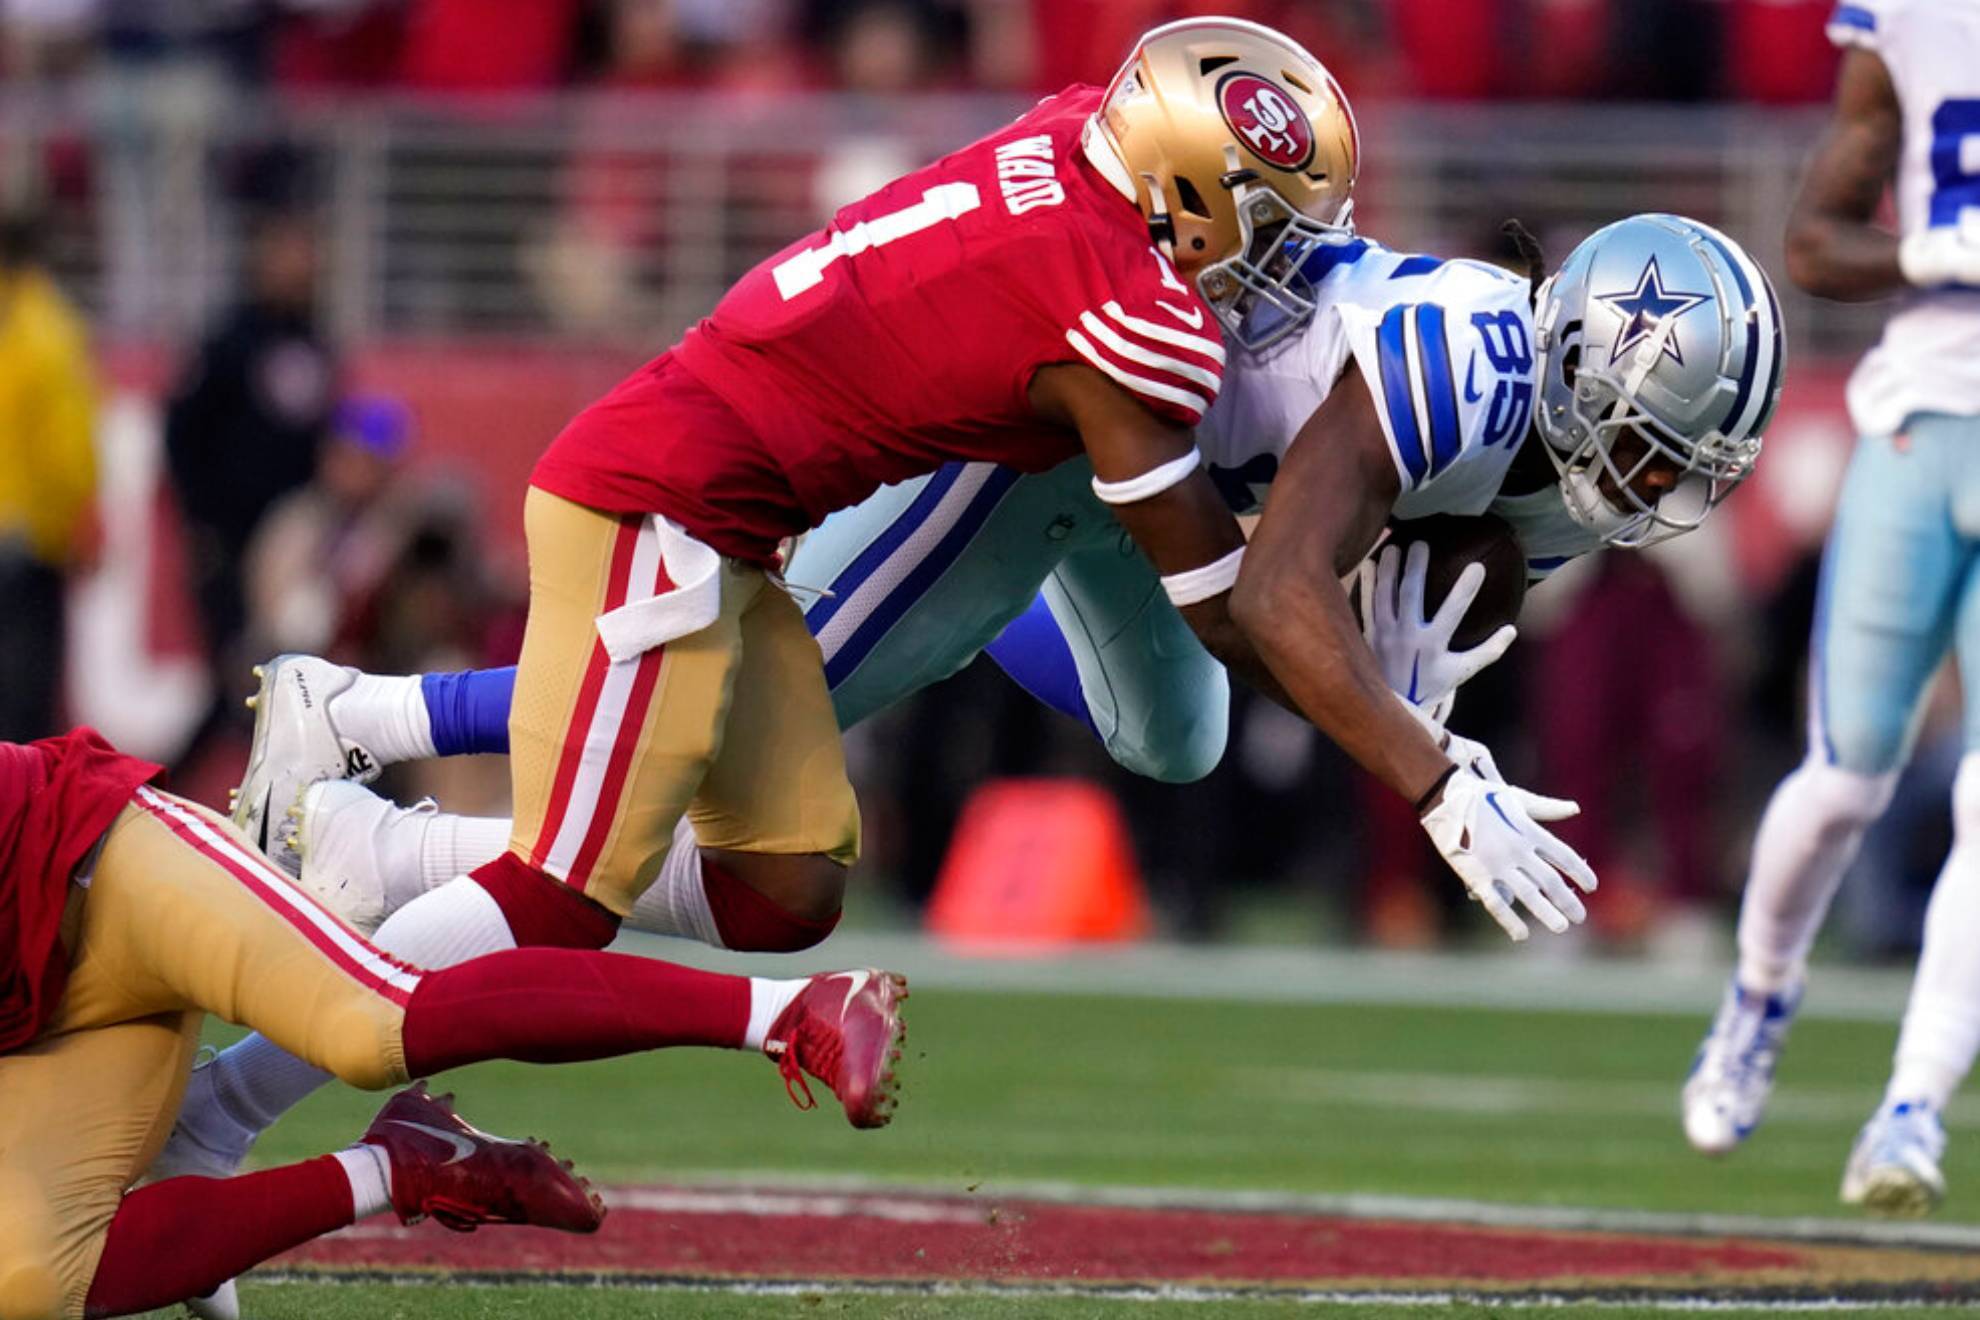 San Francisco 49ers cornerback Jimmie Ward (1) tackles Dallas Cowboys wide receiver Noah Brown during the first half of an NFL divisional round playoff football game in Santa Clara